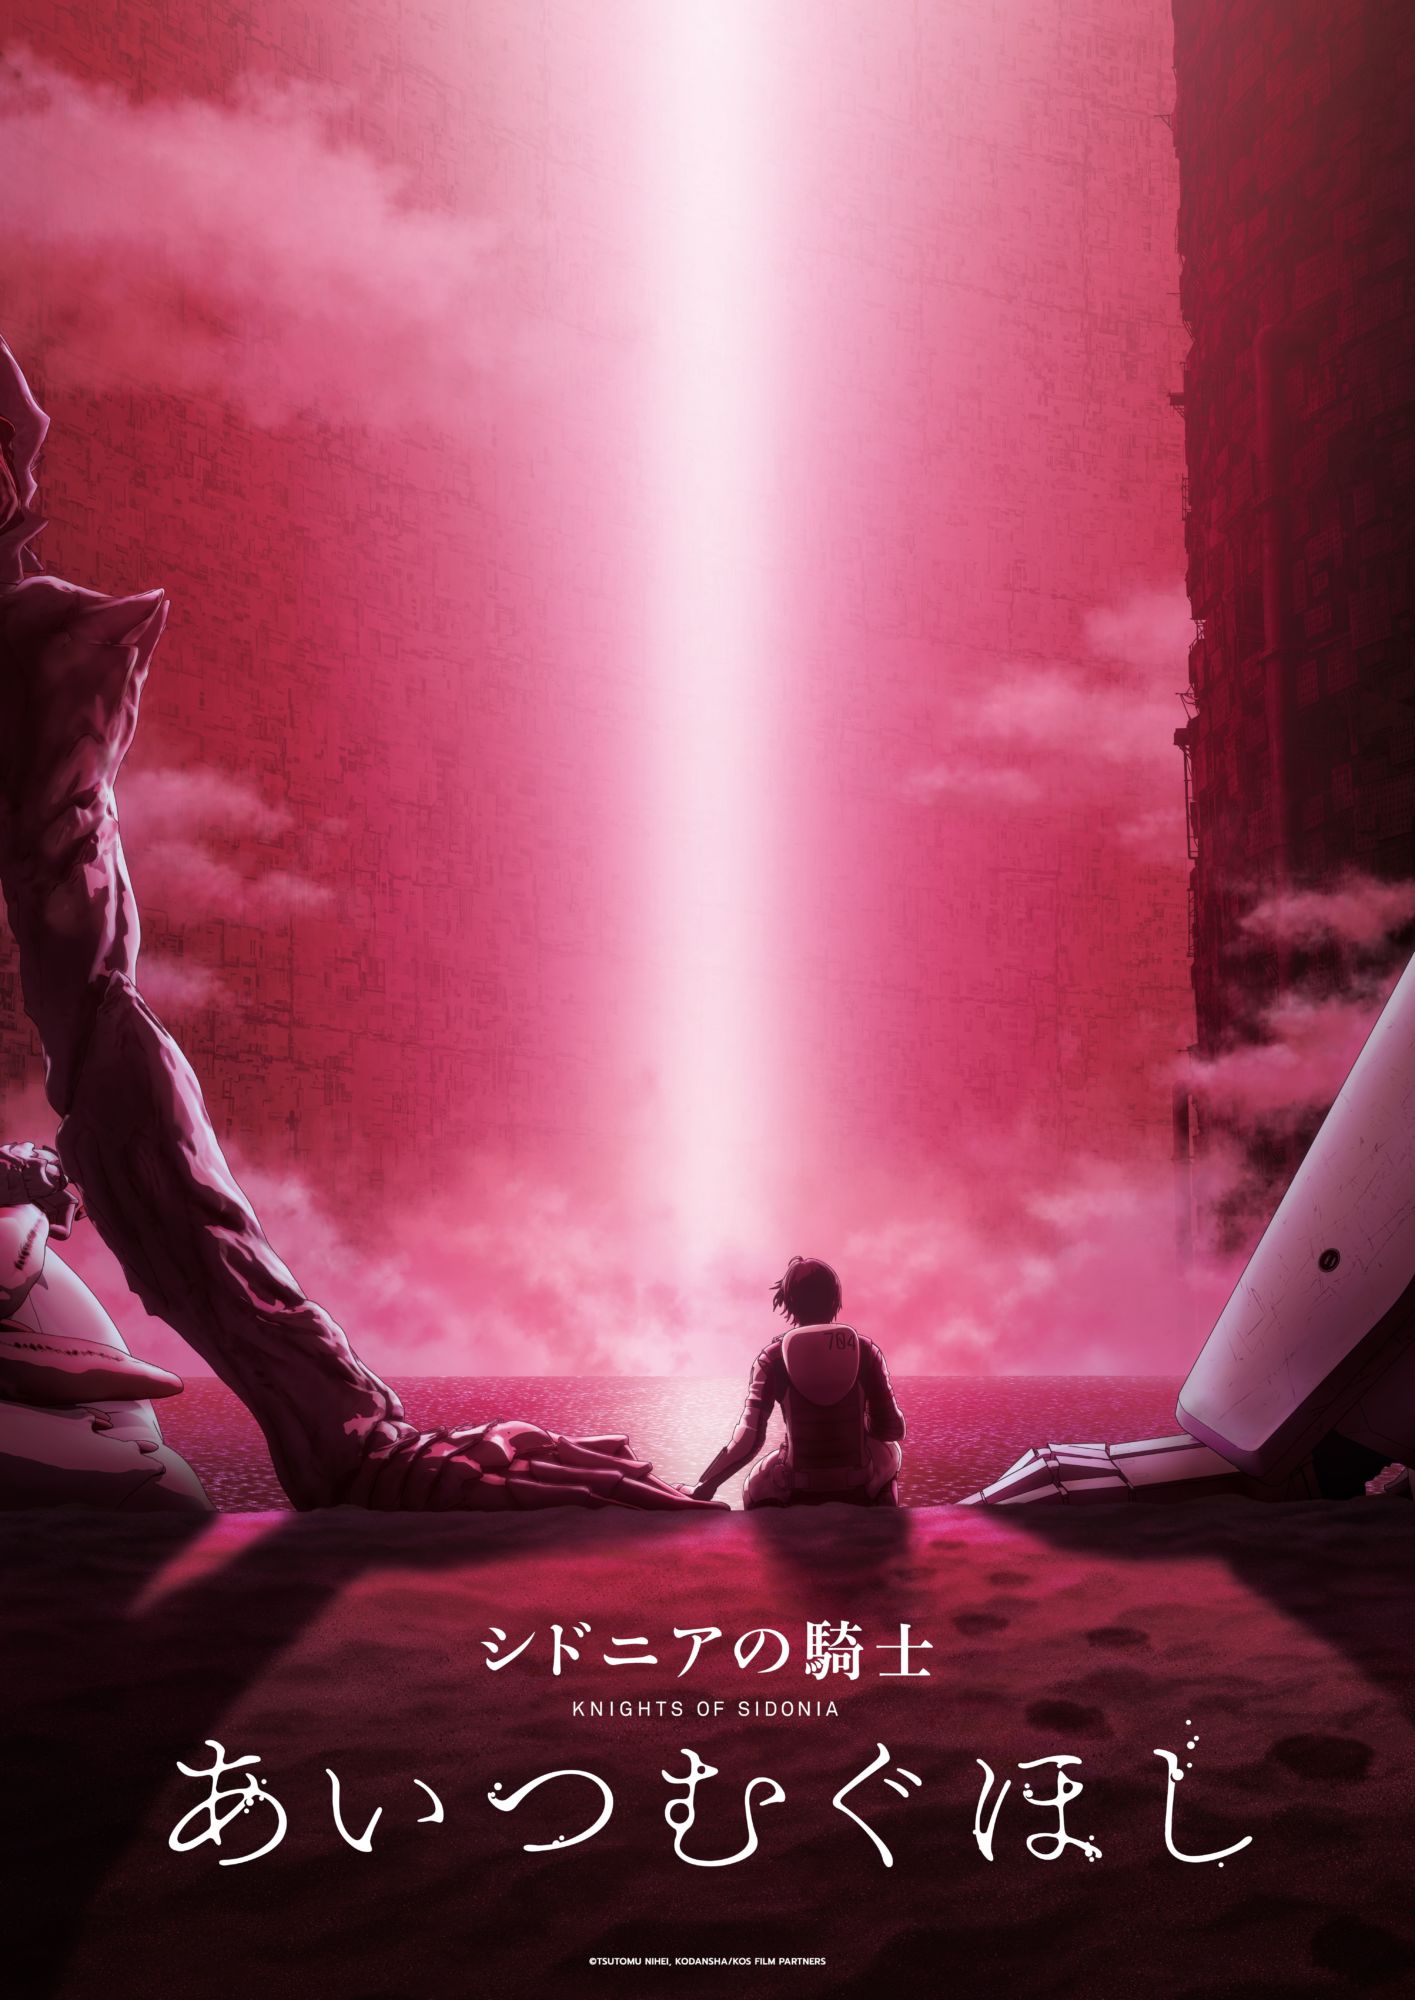 Knights of Sidonia Love Woven in the Stars  IGN